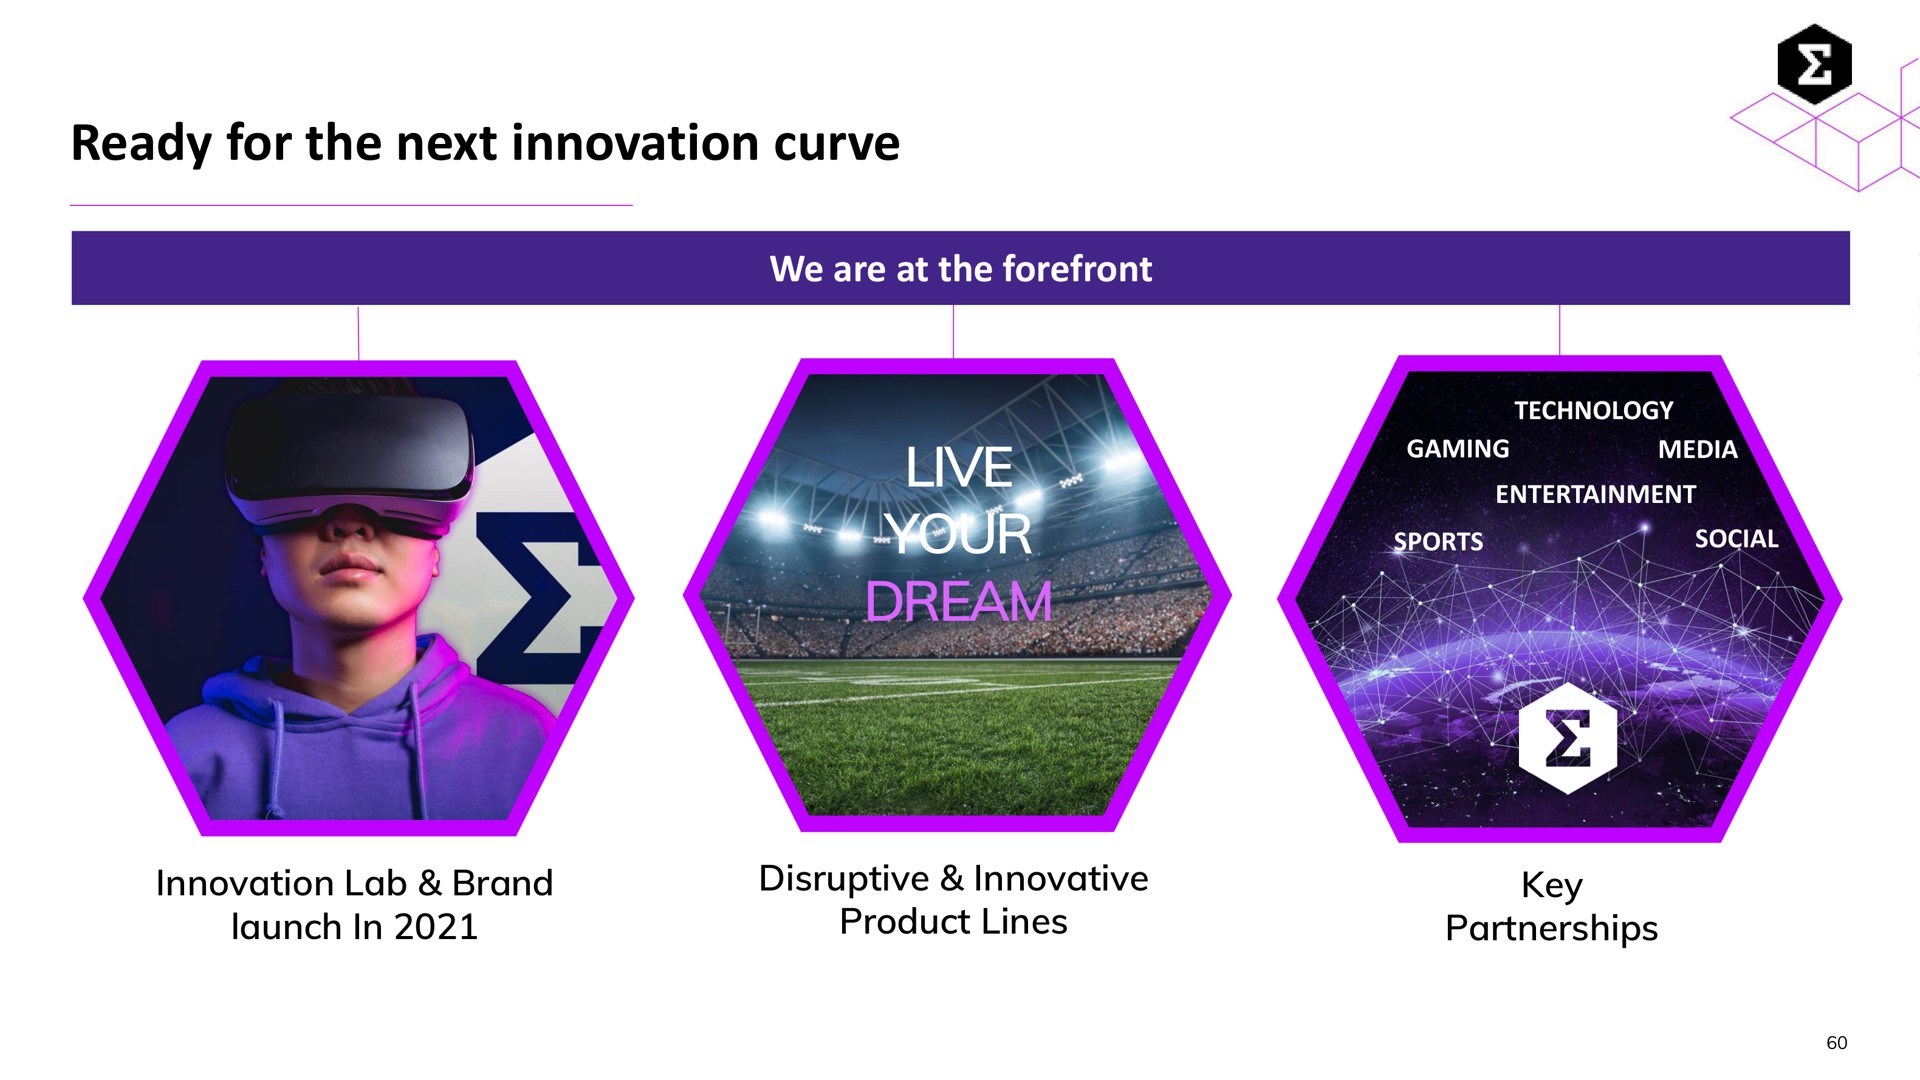 ready for the next innovation curve pic live your dream pic | Entain Group